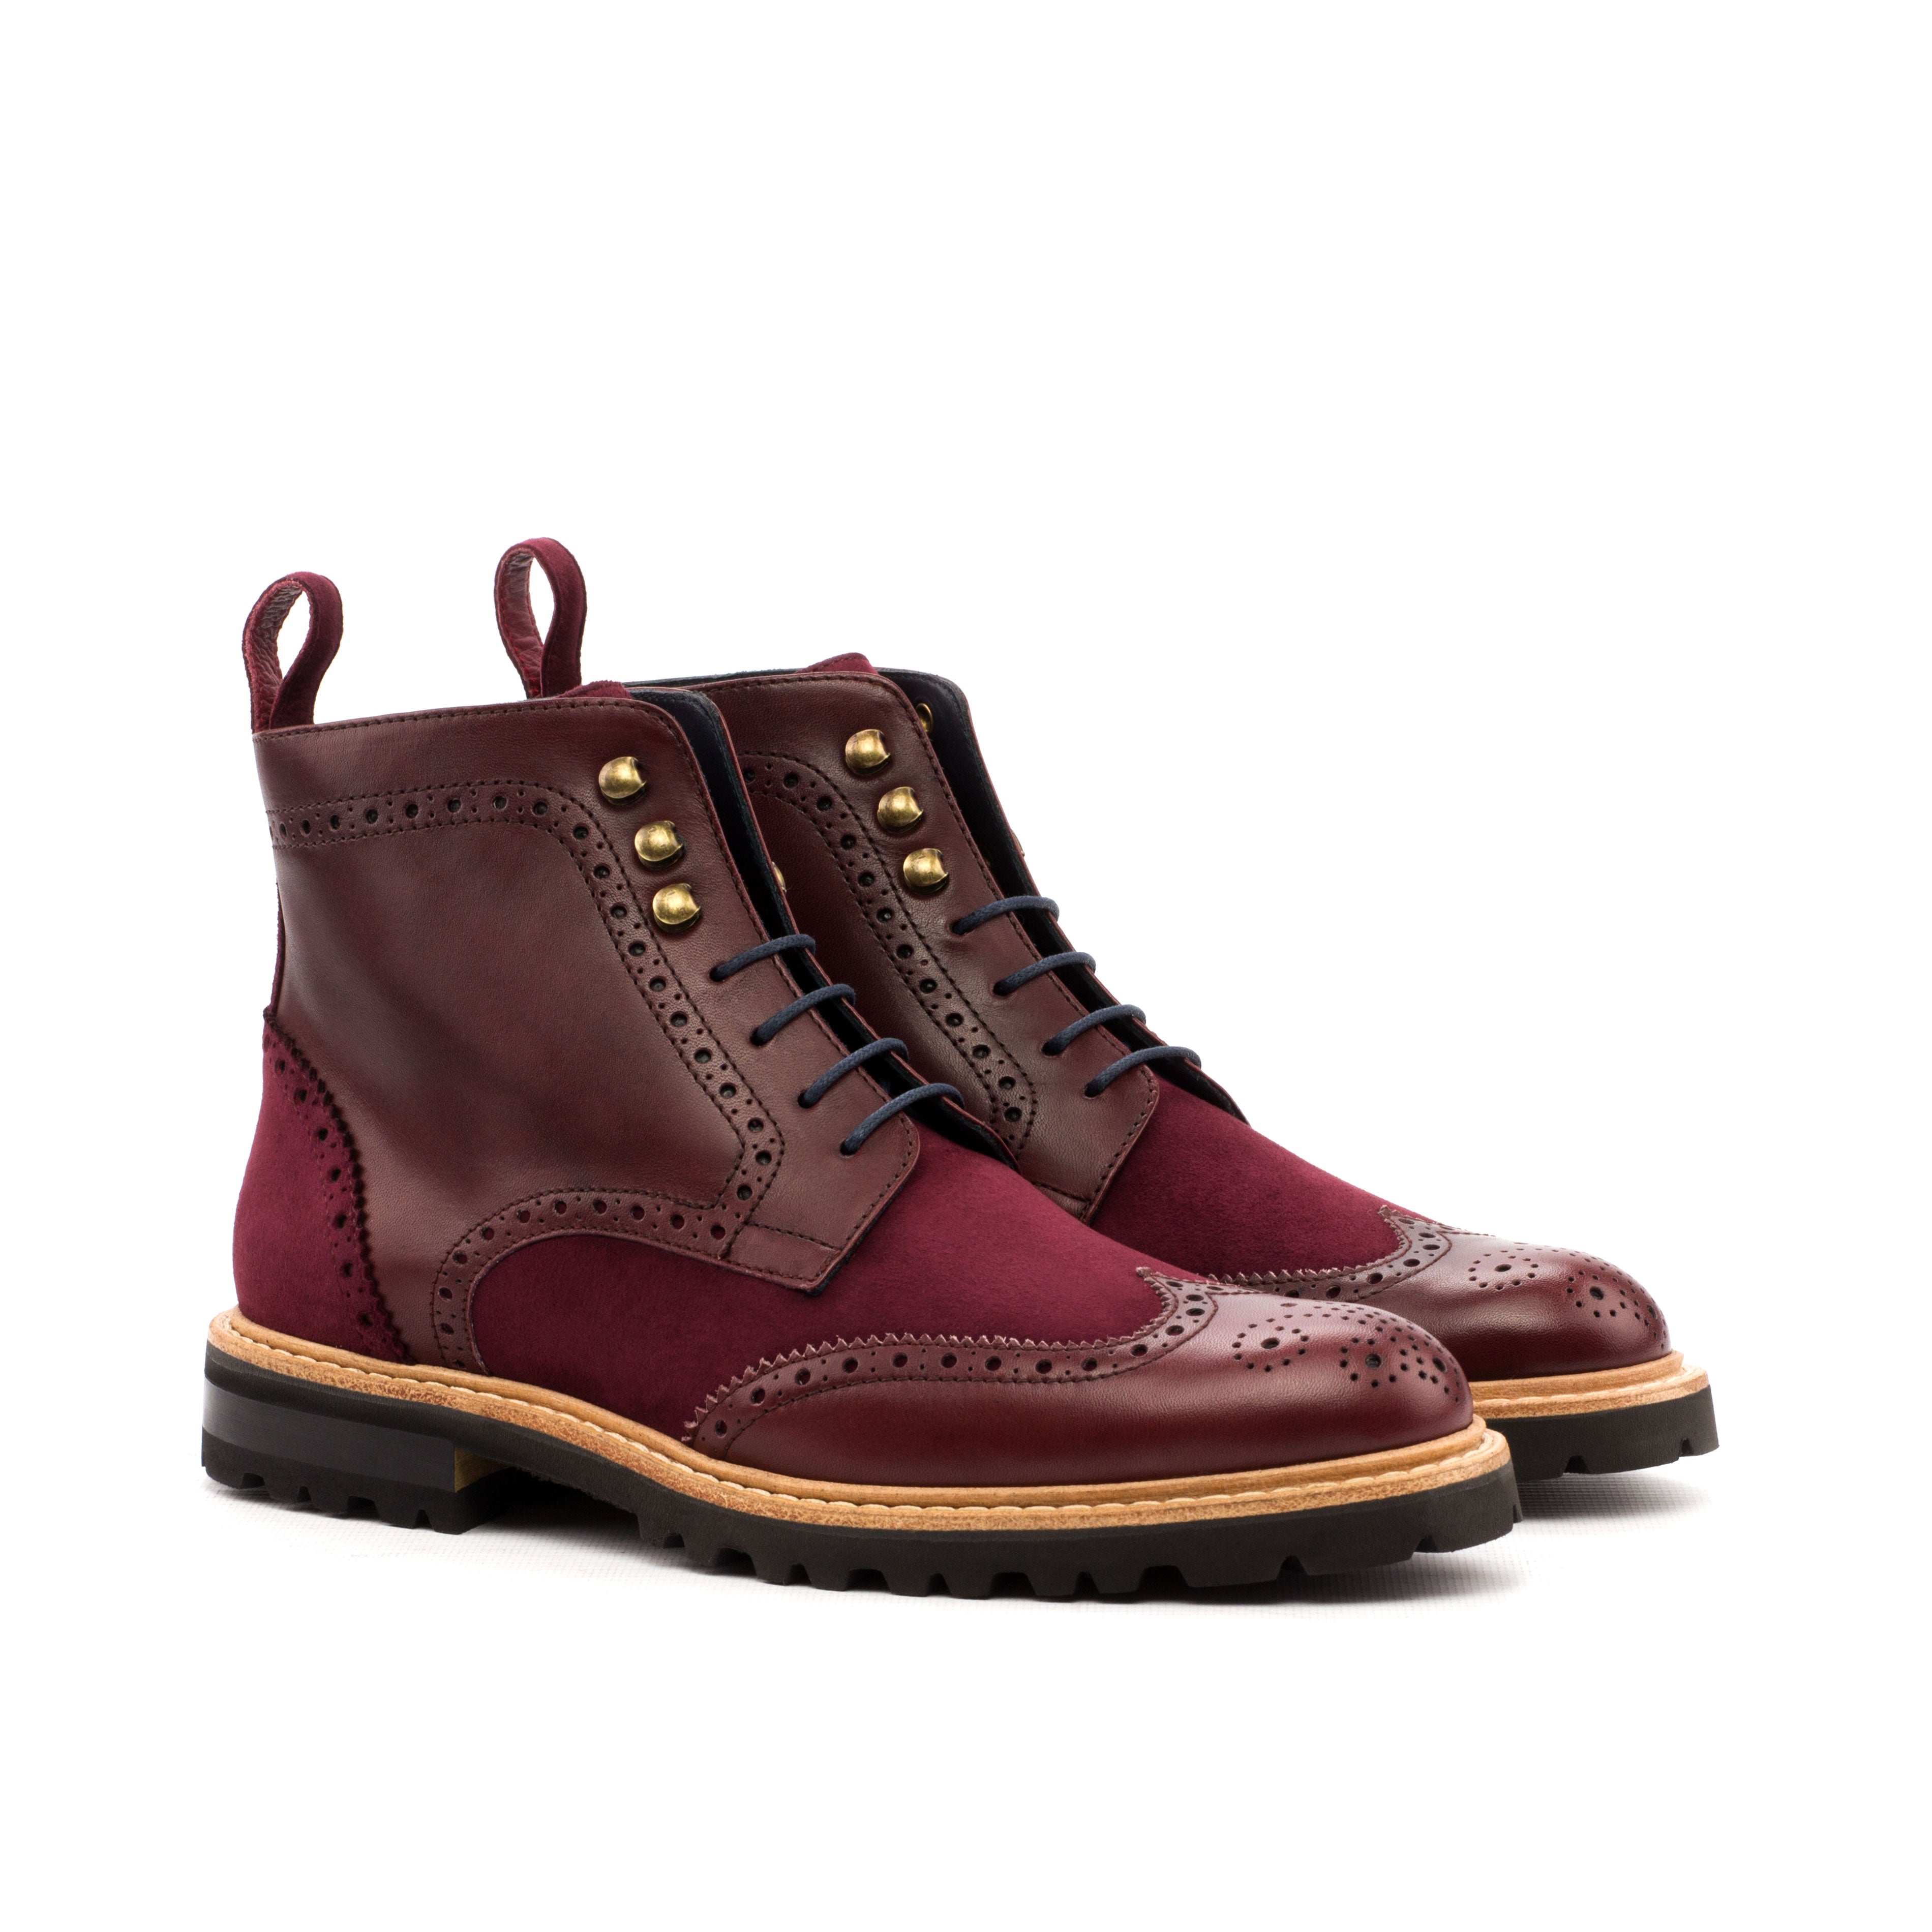 Burgundy Calf & Suede Military Boot